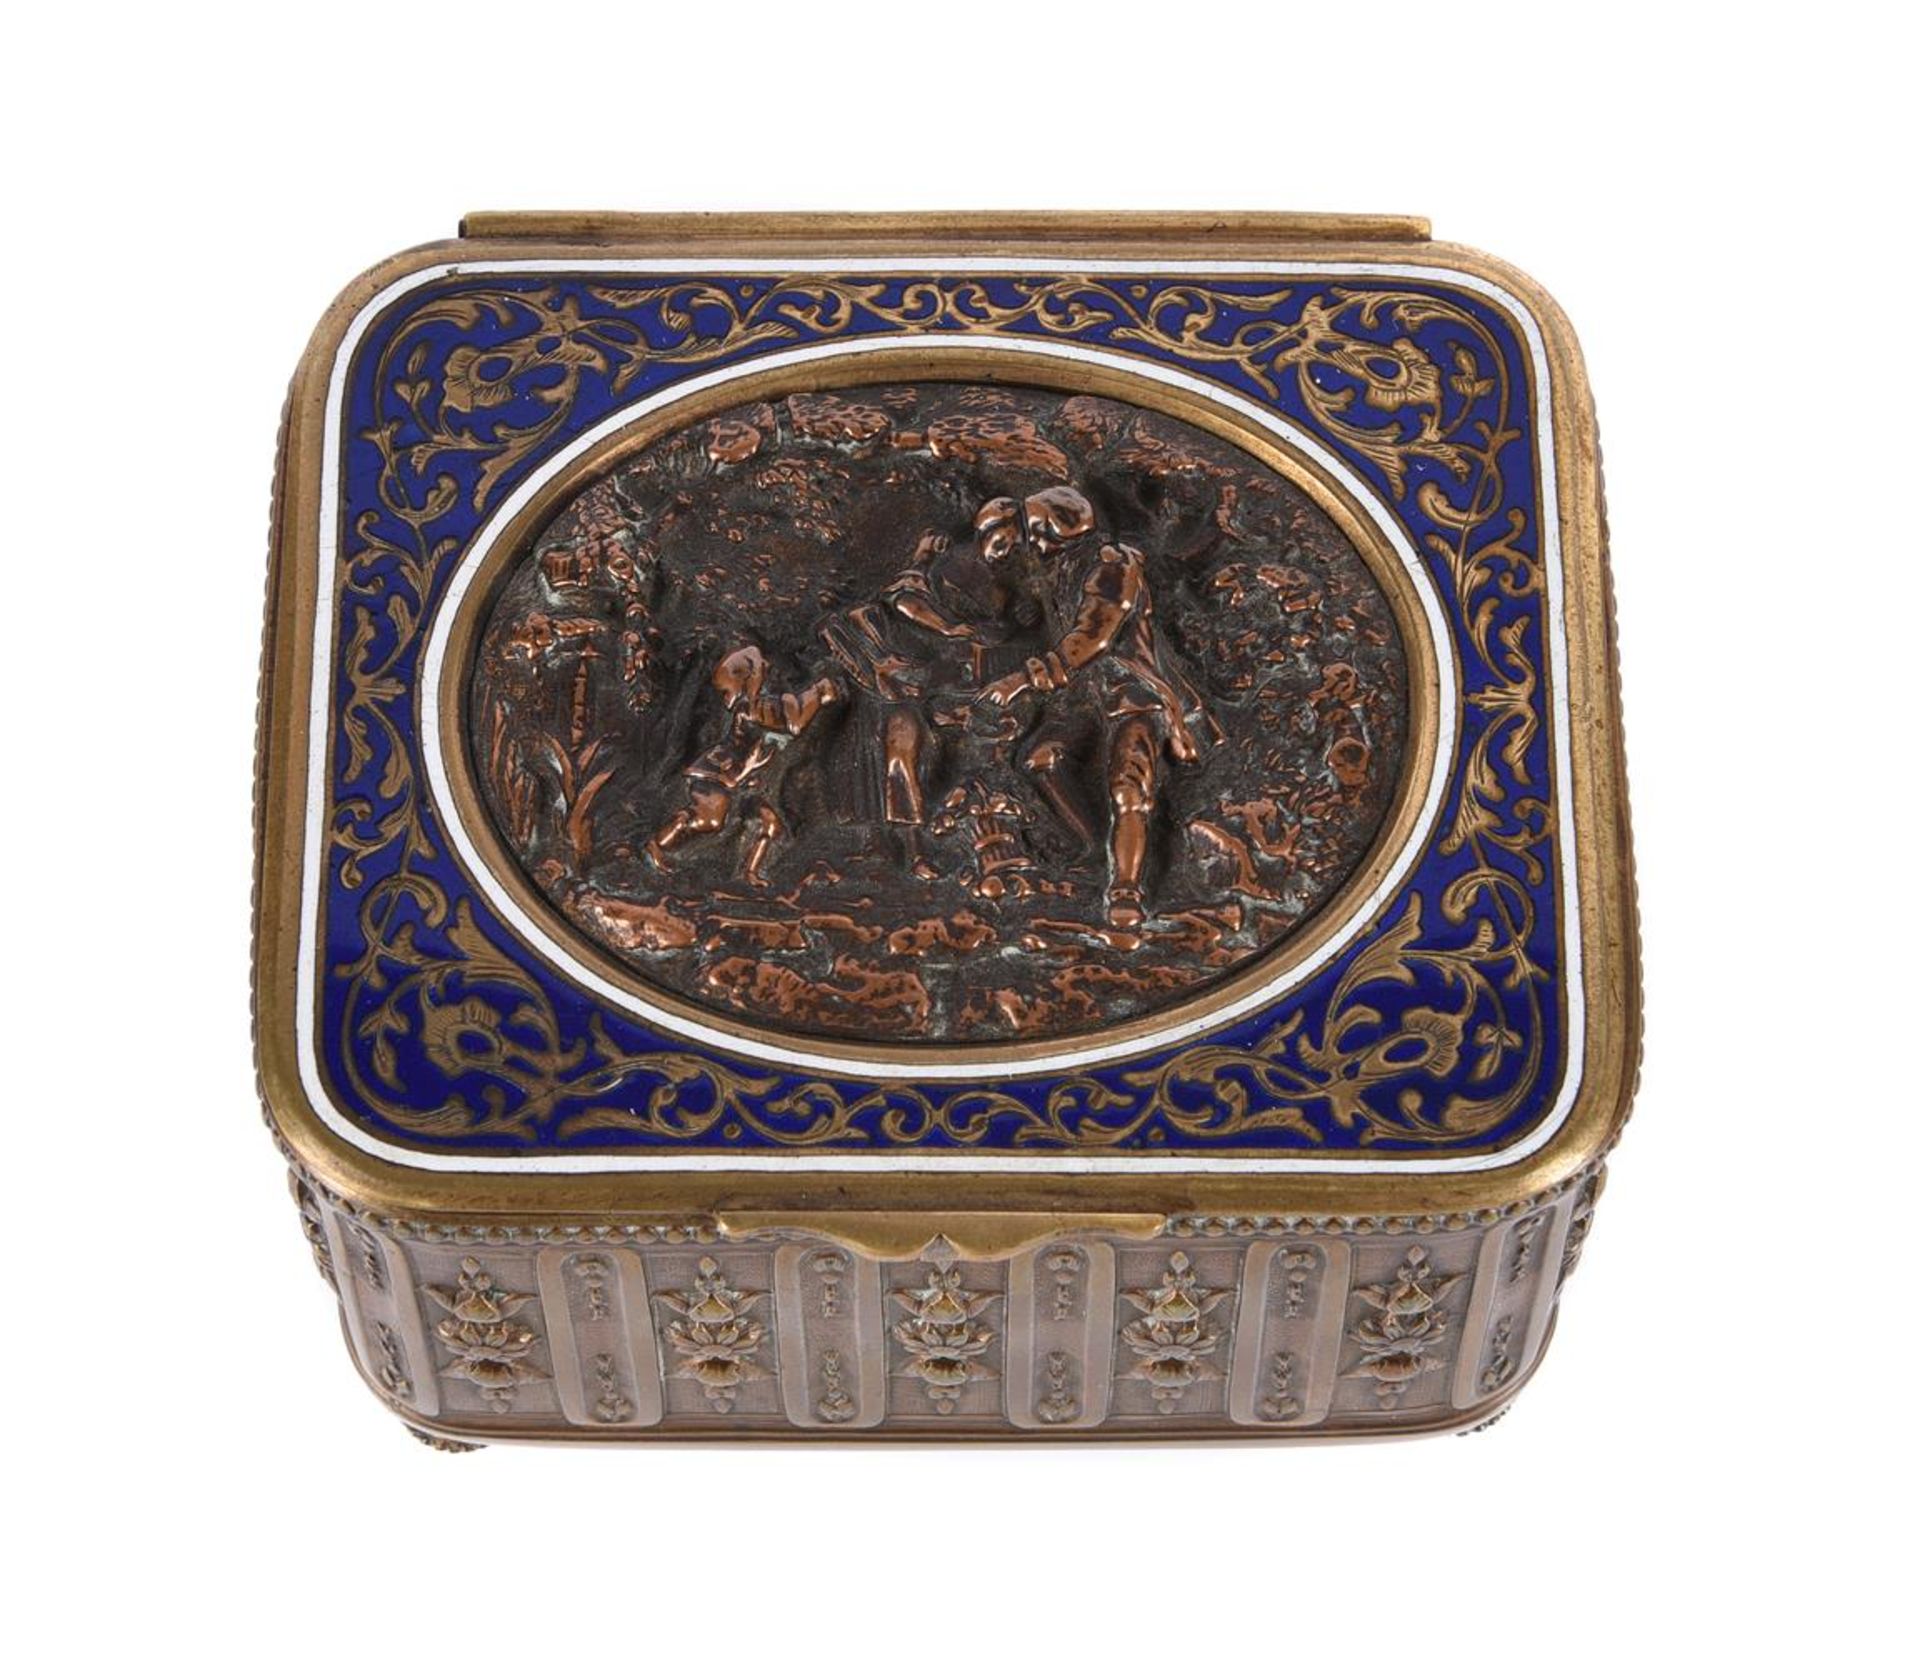 A FRENCH CHAMPLEVE ENAMEL DECORATED MUSICAL BOX - Image 2 of 2